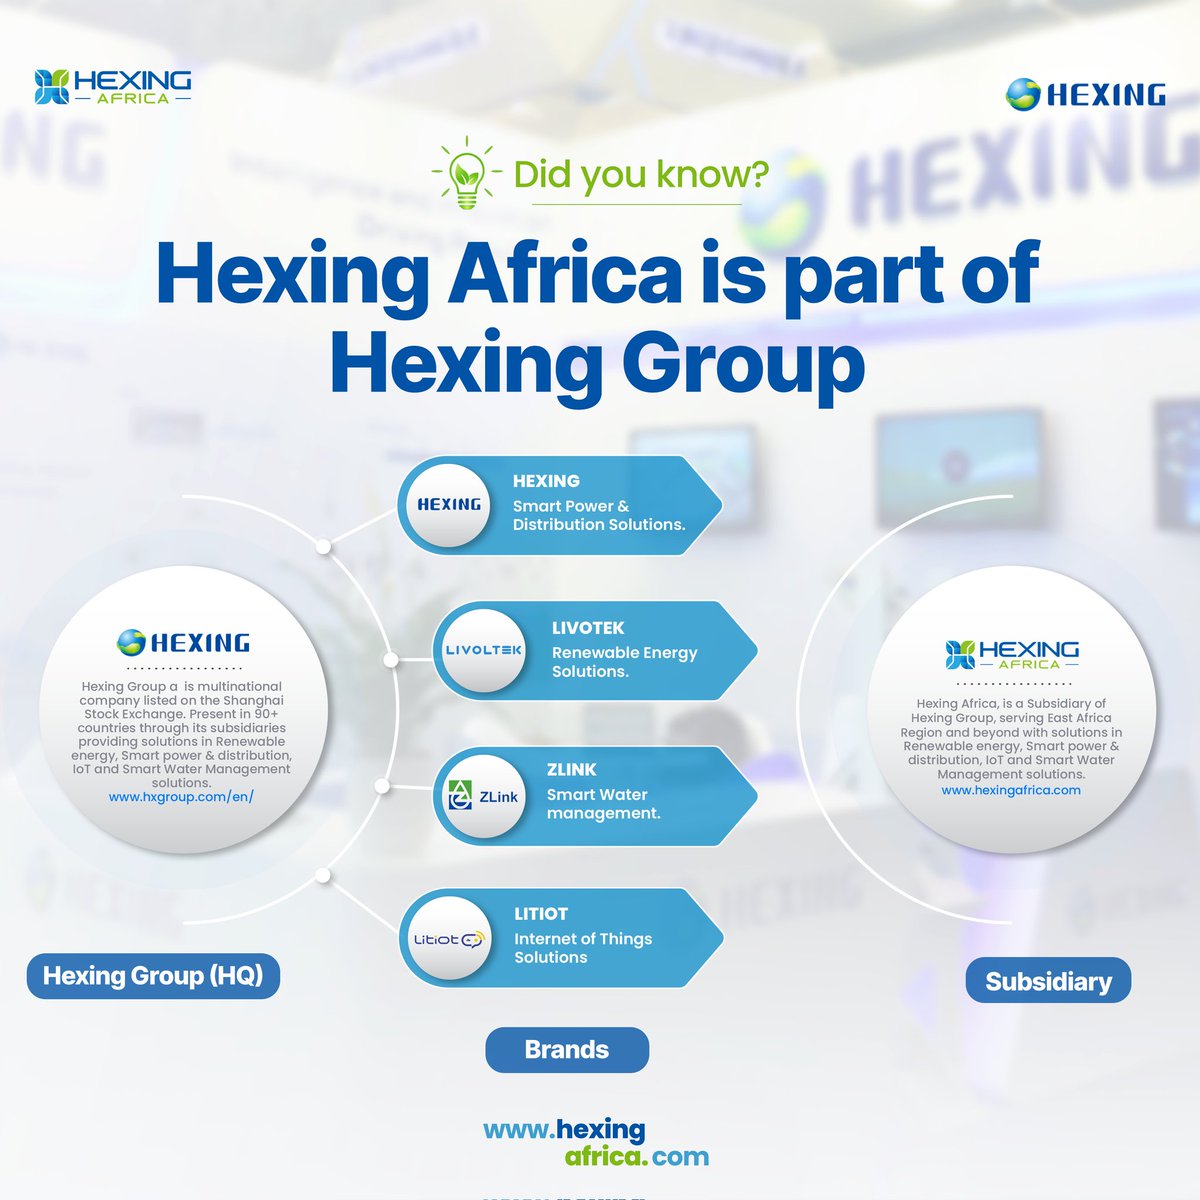 💡Did you know Hexing Africa  is one of the  subsidiaries of the Hexing Group? 

It is well known for  serving the Kenya Market for the last  20 years providing Smart power and distribution solutions.

Now you know.💡

#Gogreengodigital #HexingAfrica #HexingGroup